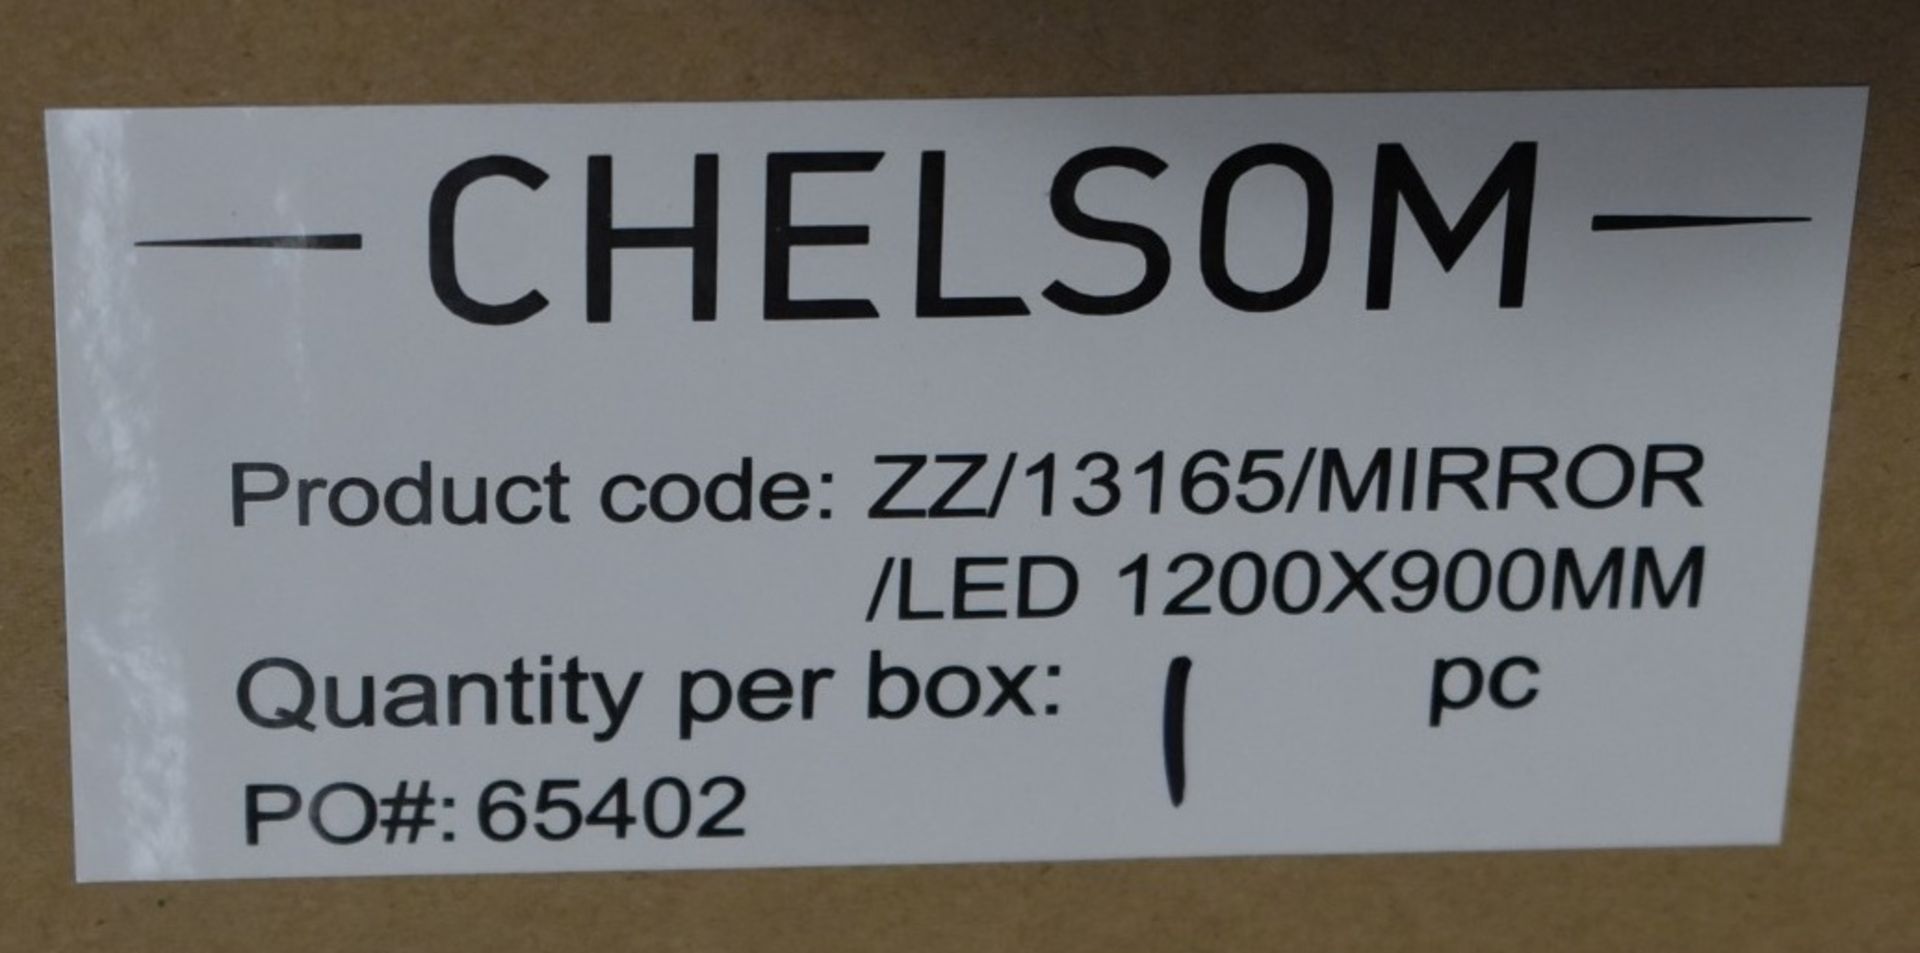 1 x Chelsom Large Illuminated LED Bathroom Mirror With Demister - Brand New Stock - As Used in Major - Image 6 of 13